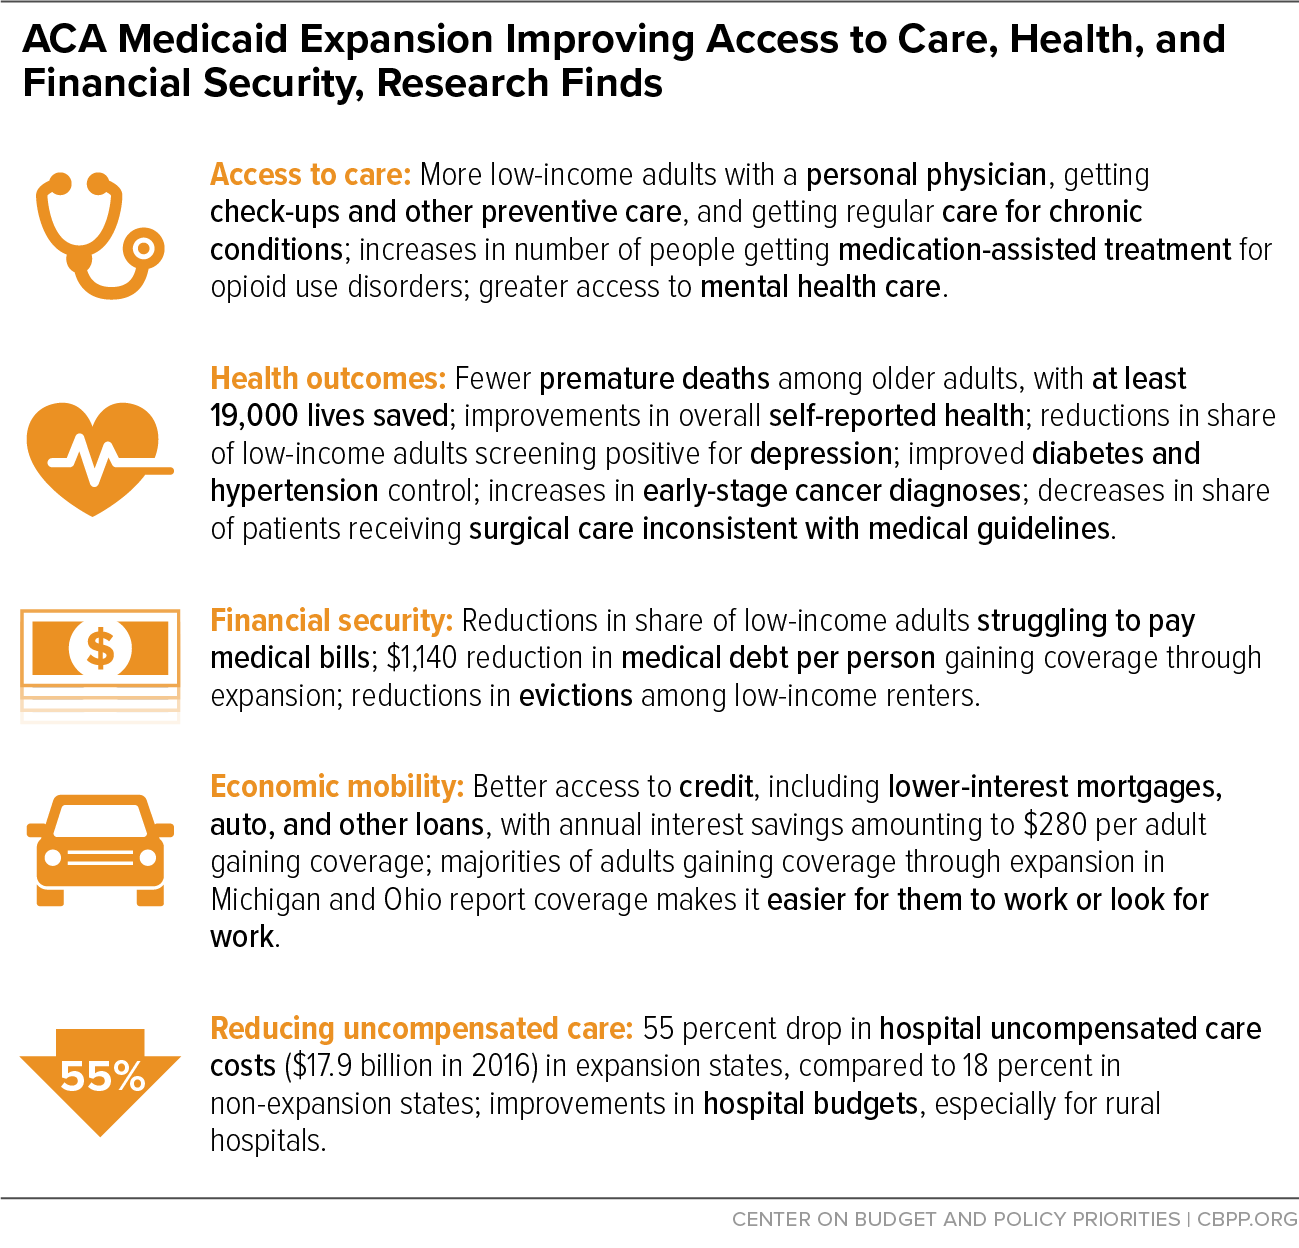 ACA Medicaid Expansion Improving Access to Care, Health, and Financial Security, Research Finds